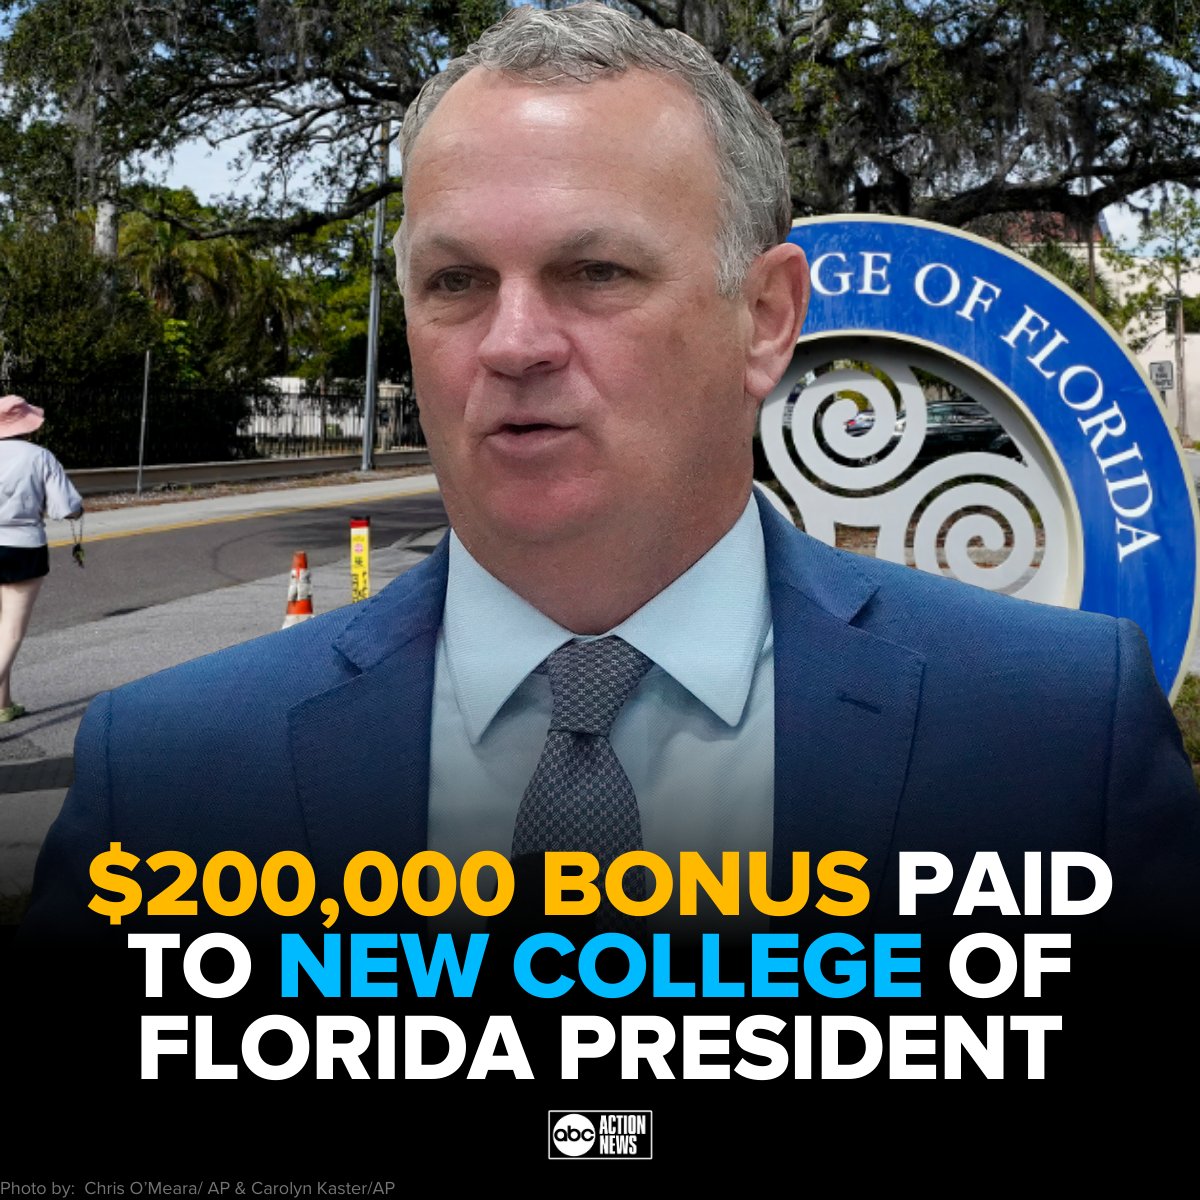 As his first full academic year at the school closes, Richard Corcoran will receive a bonus on top of his salary, which already makes him one of the highest-paid college presidents in Florida. Full story >> wfts.tv/3xA5sDi